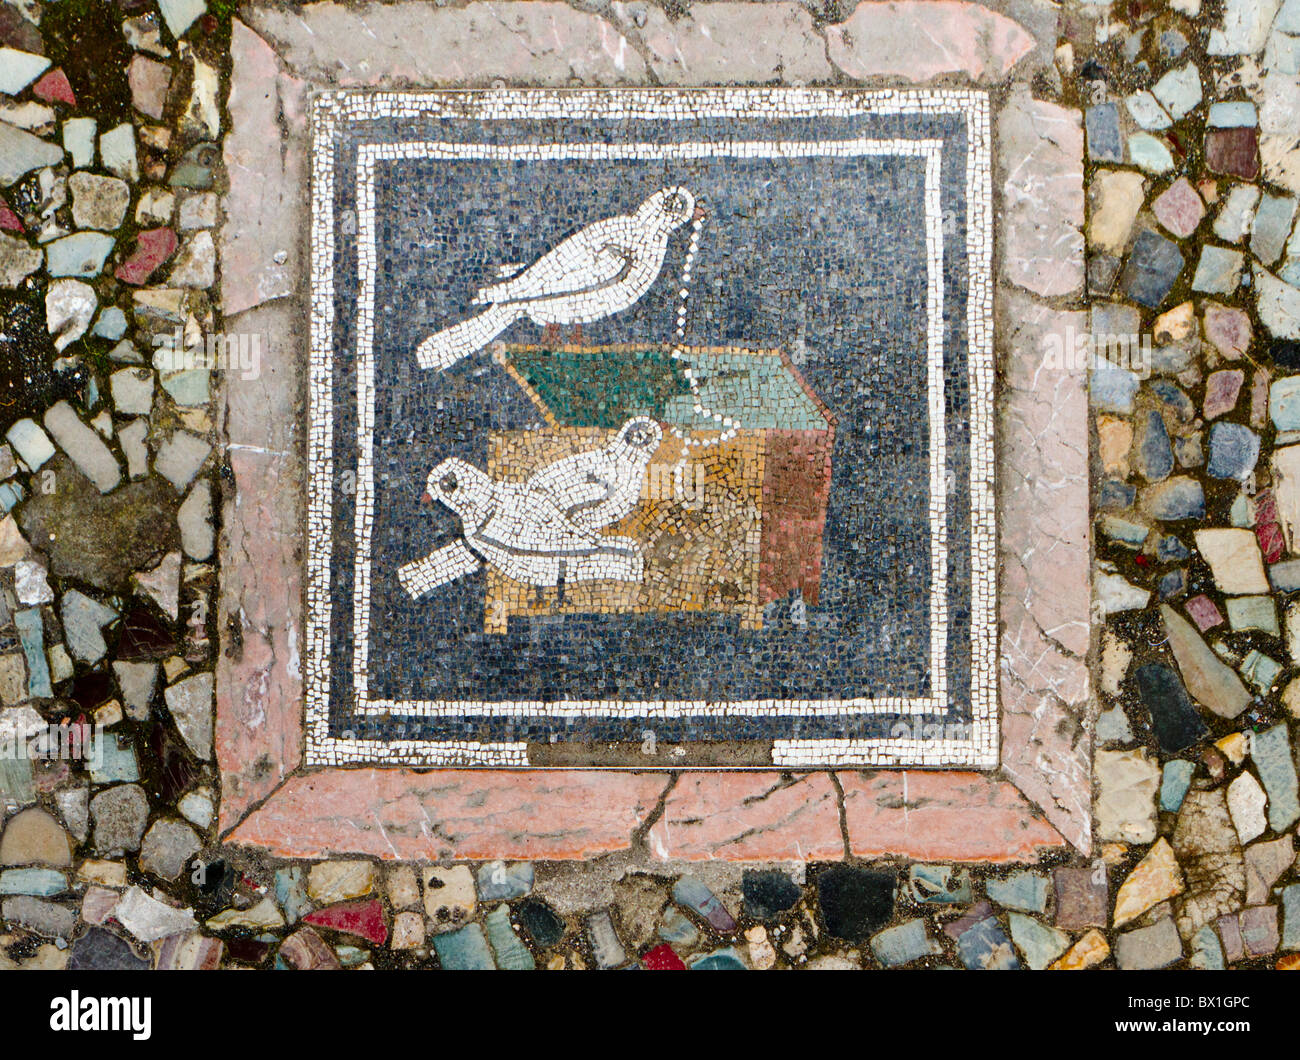 Mosaic floor in Pompeii depicting birds stealing pearls from a jewelry box Stock Photo